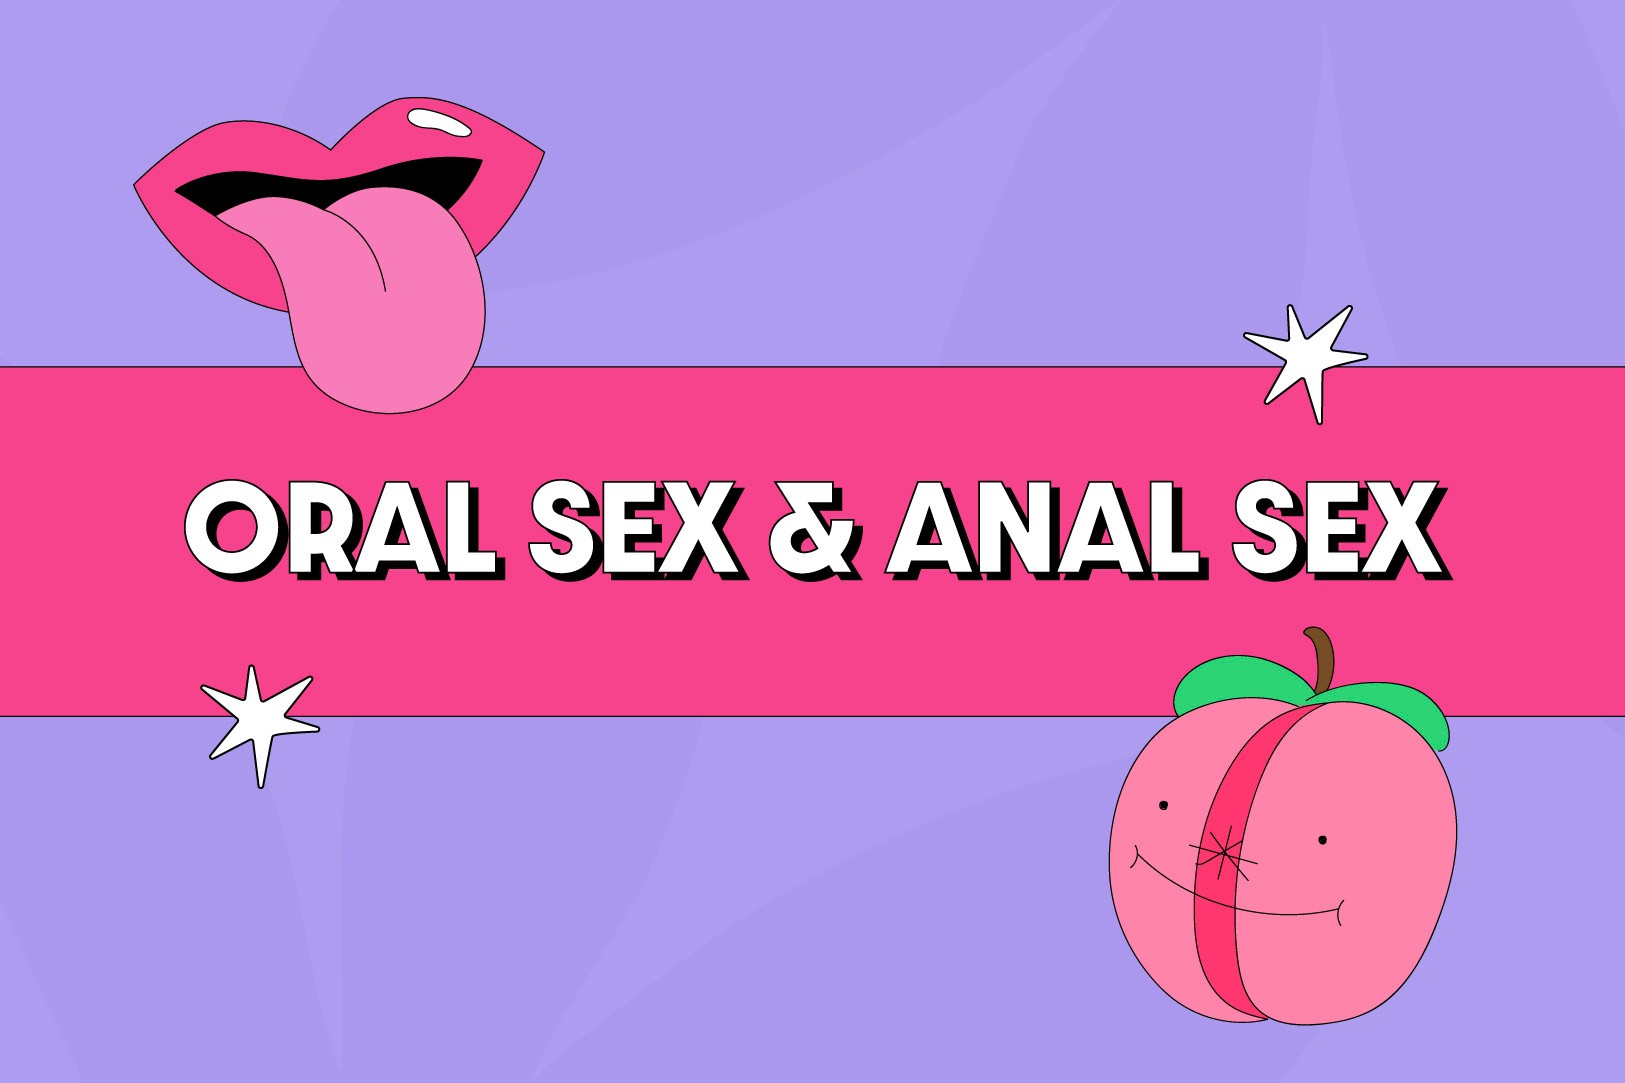 safe practices for anal and oral sex